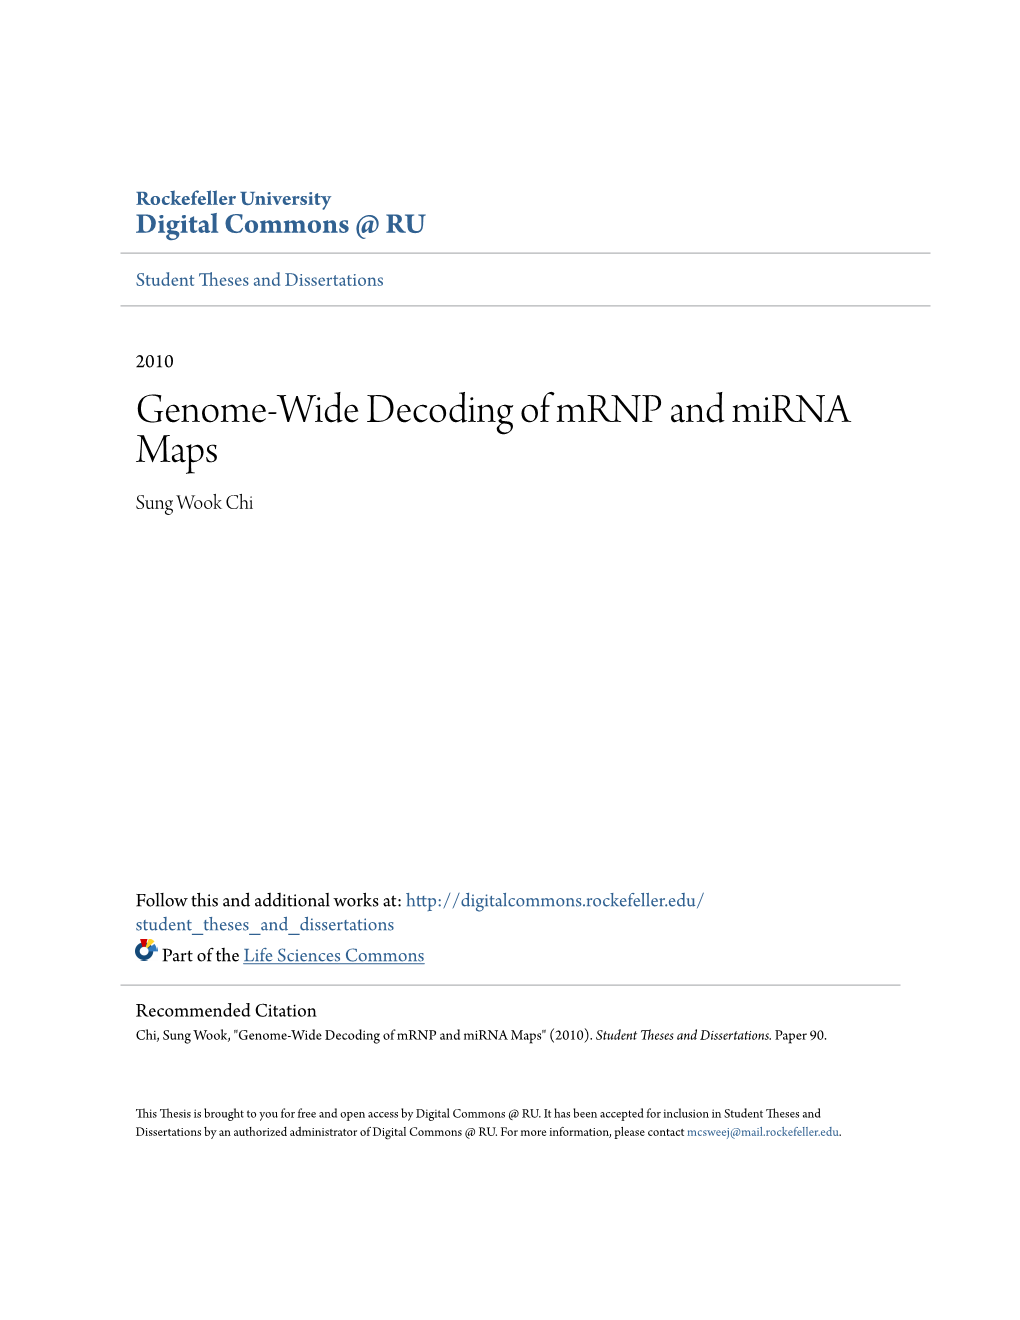 Genome-Wide Decoding of Mrnp and Mirna Maps Sung Wook Chi